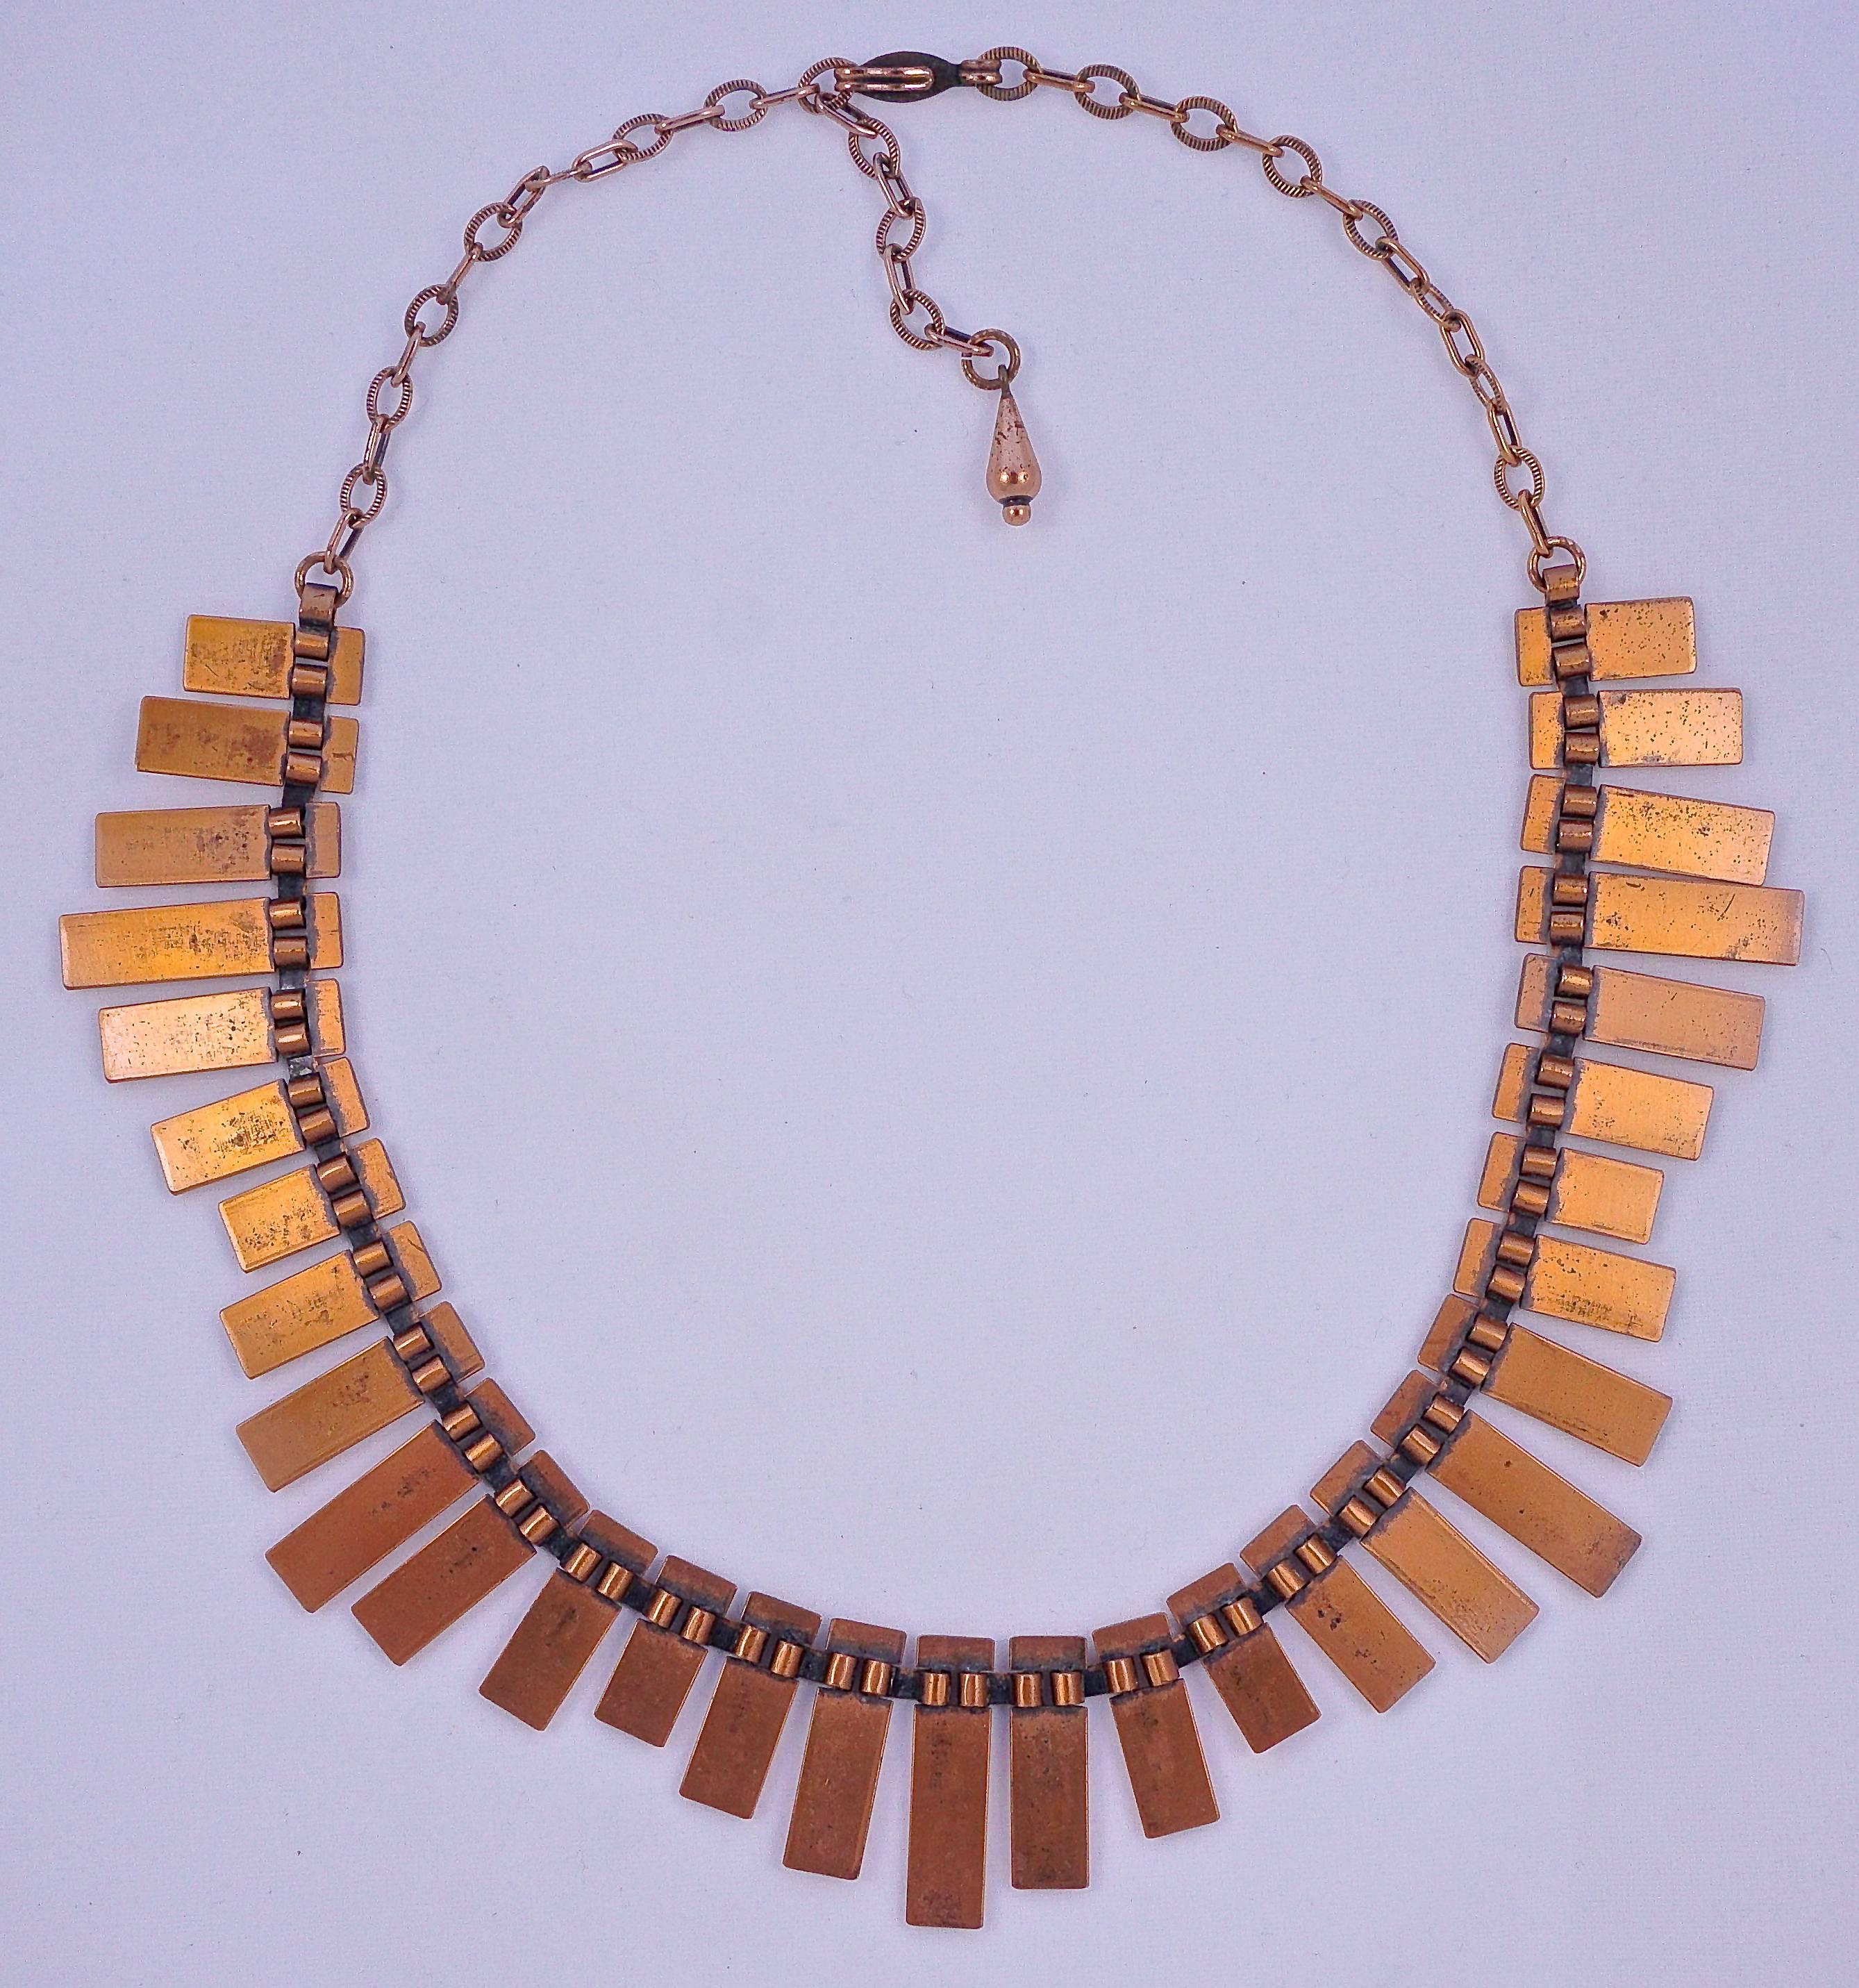 Wonderful Renoir shiny copper necklace with long rectangular drops linked together, forming an Egyptian inspired necklace. Length 45.5cm, 18 inches, and the longest drop is 2.5cm, 1 inch. The chain is adjustable, and features alternating fancy and